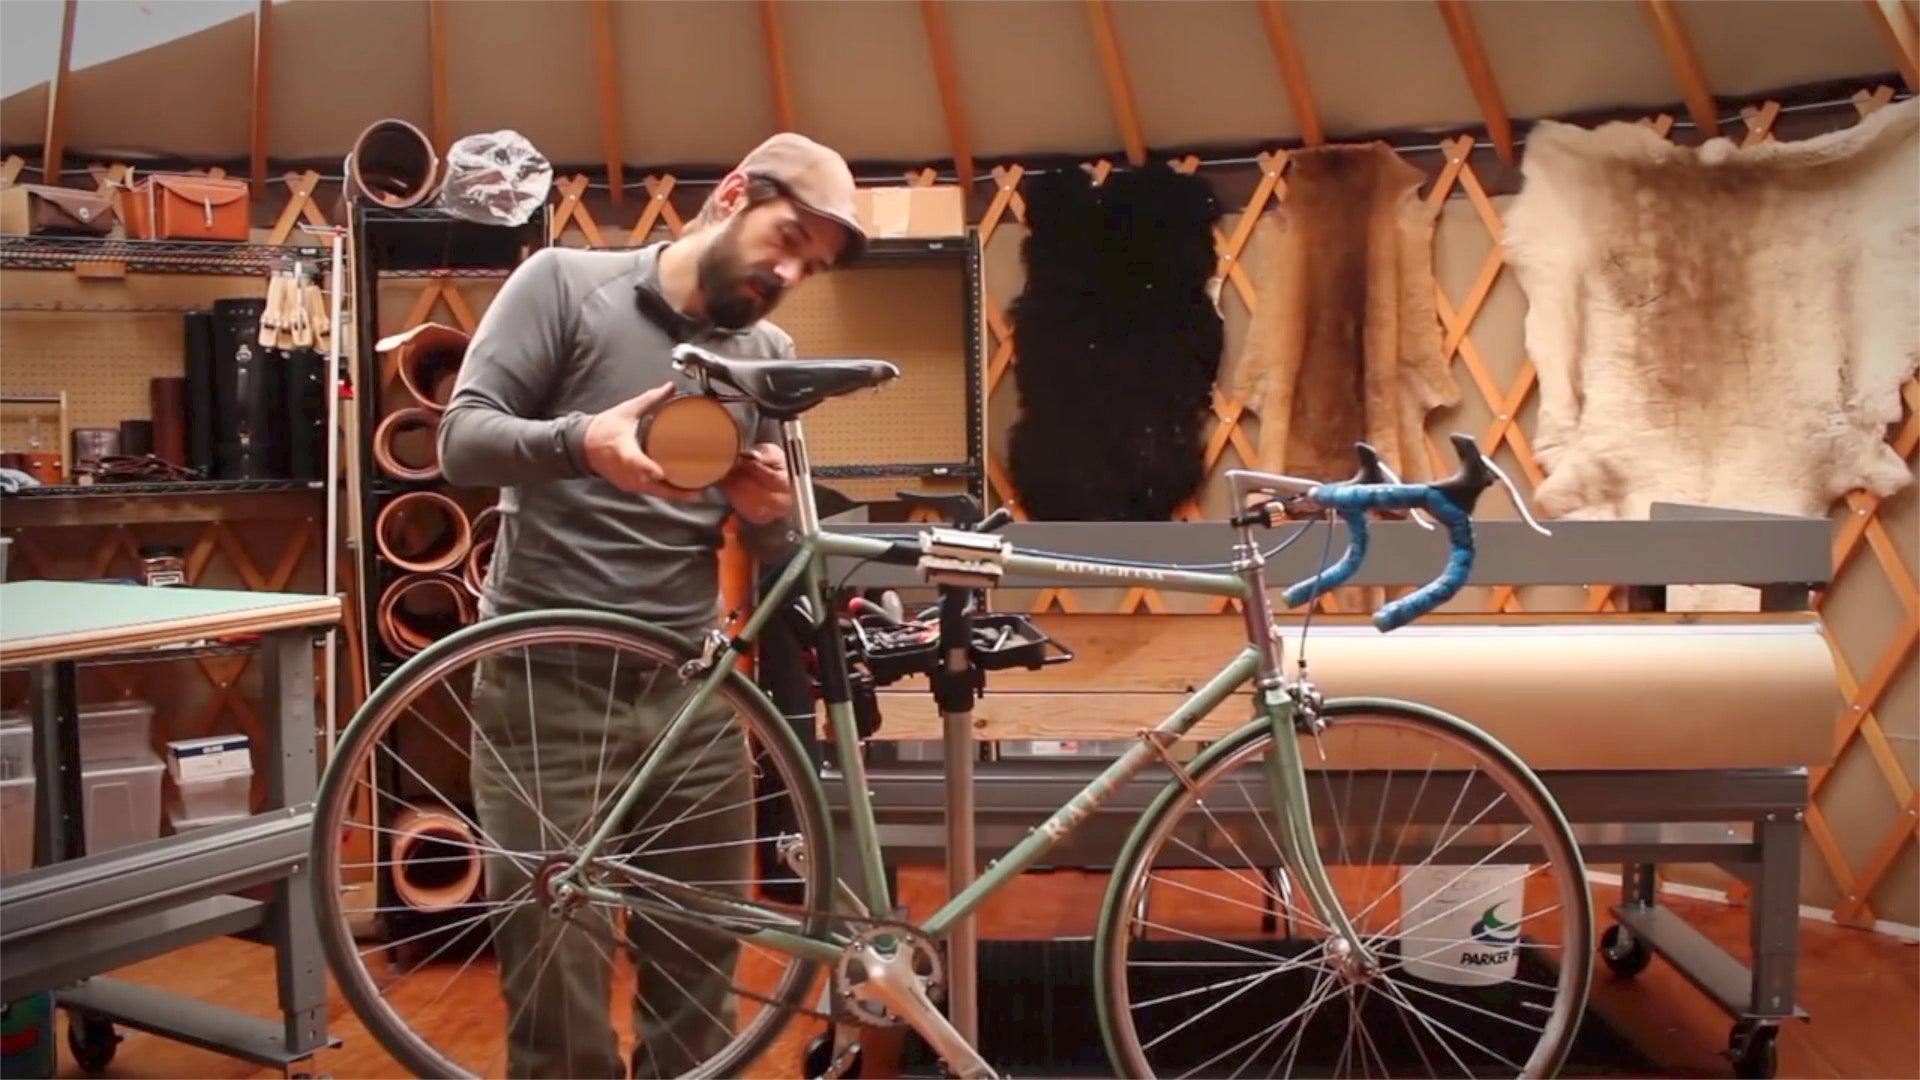 Geoff Franklin of Walnut Studiolo installing a leather bicycle barrel bag on the saddle of a bicycle in a yurt, surrounded by hanging sheepskins and rolls of leather in warm lighting